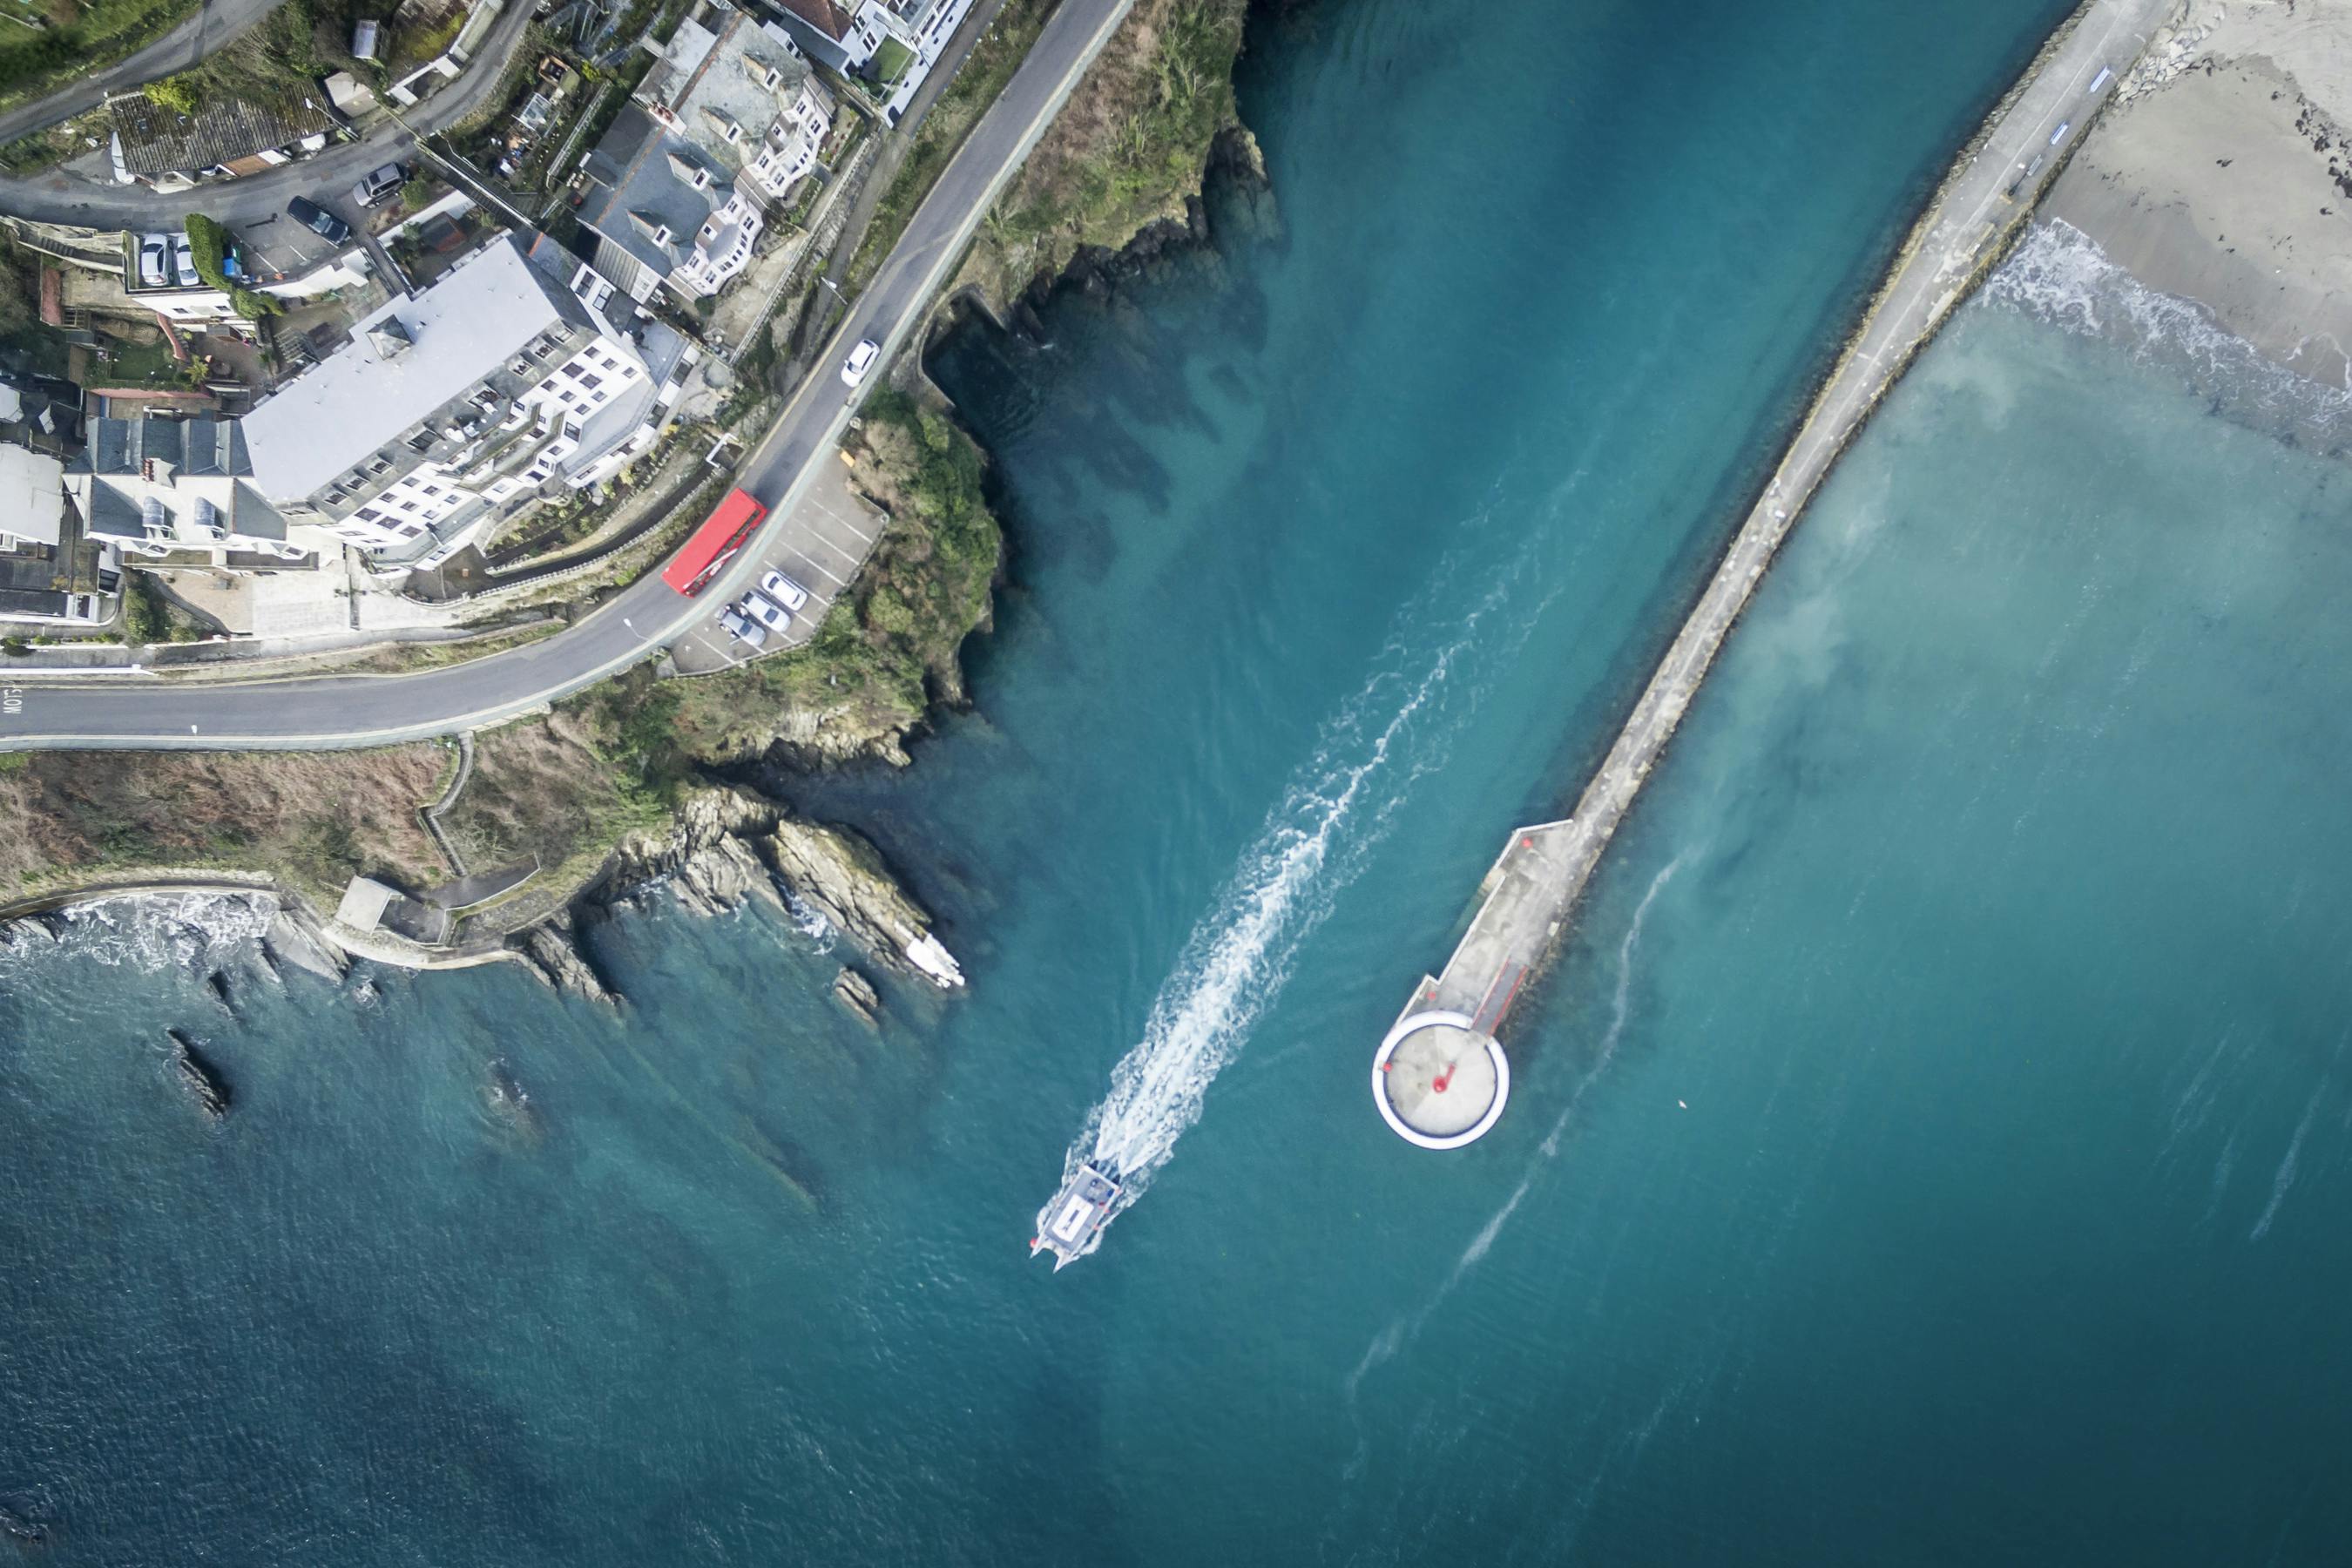 Striking aerial photography by Tim Gundry